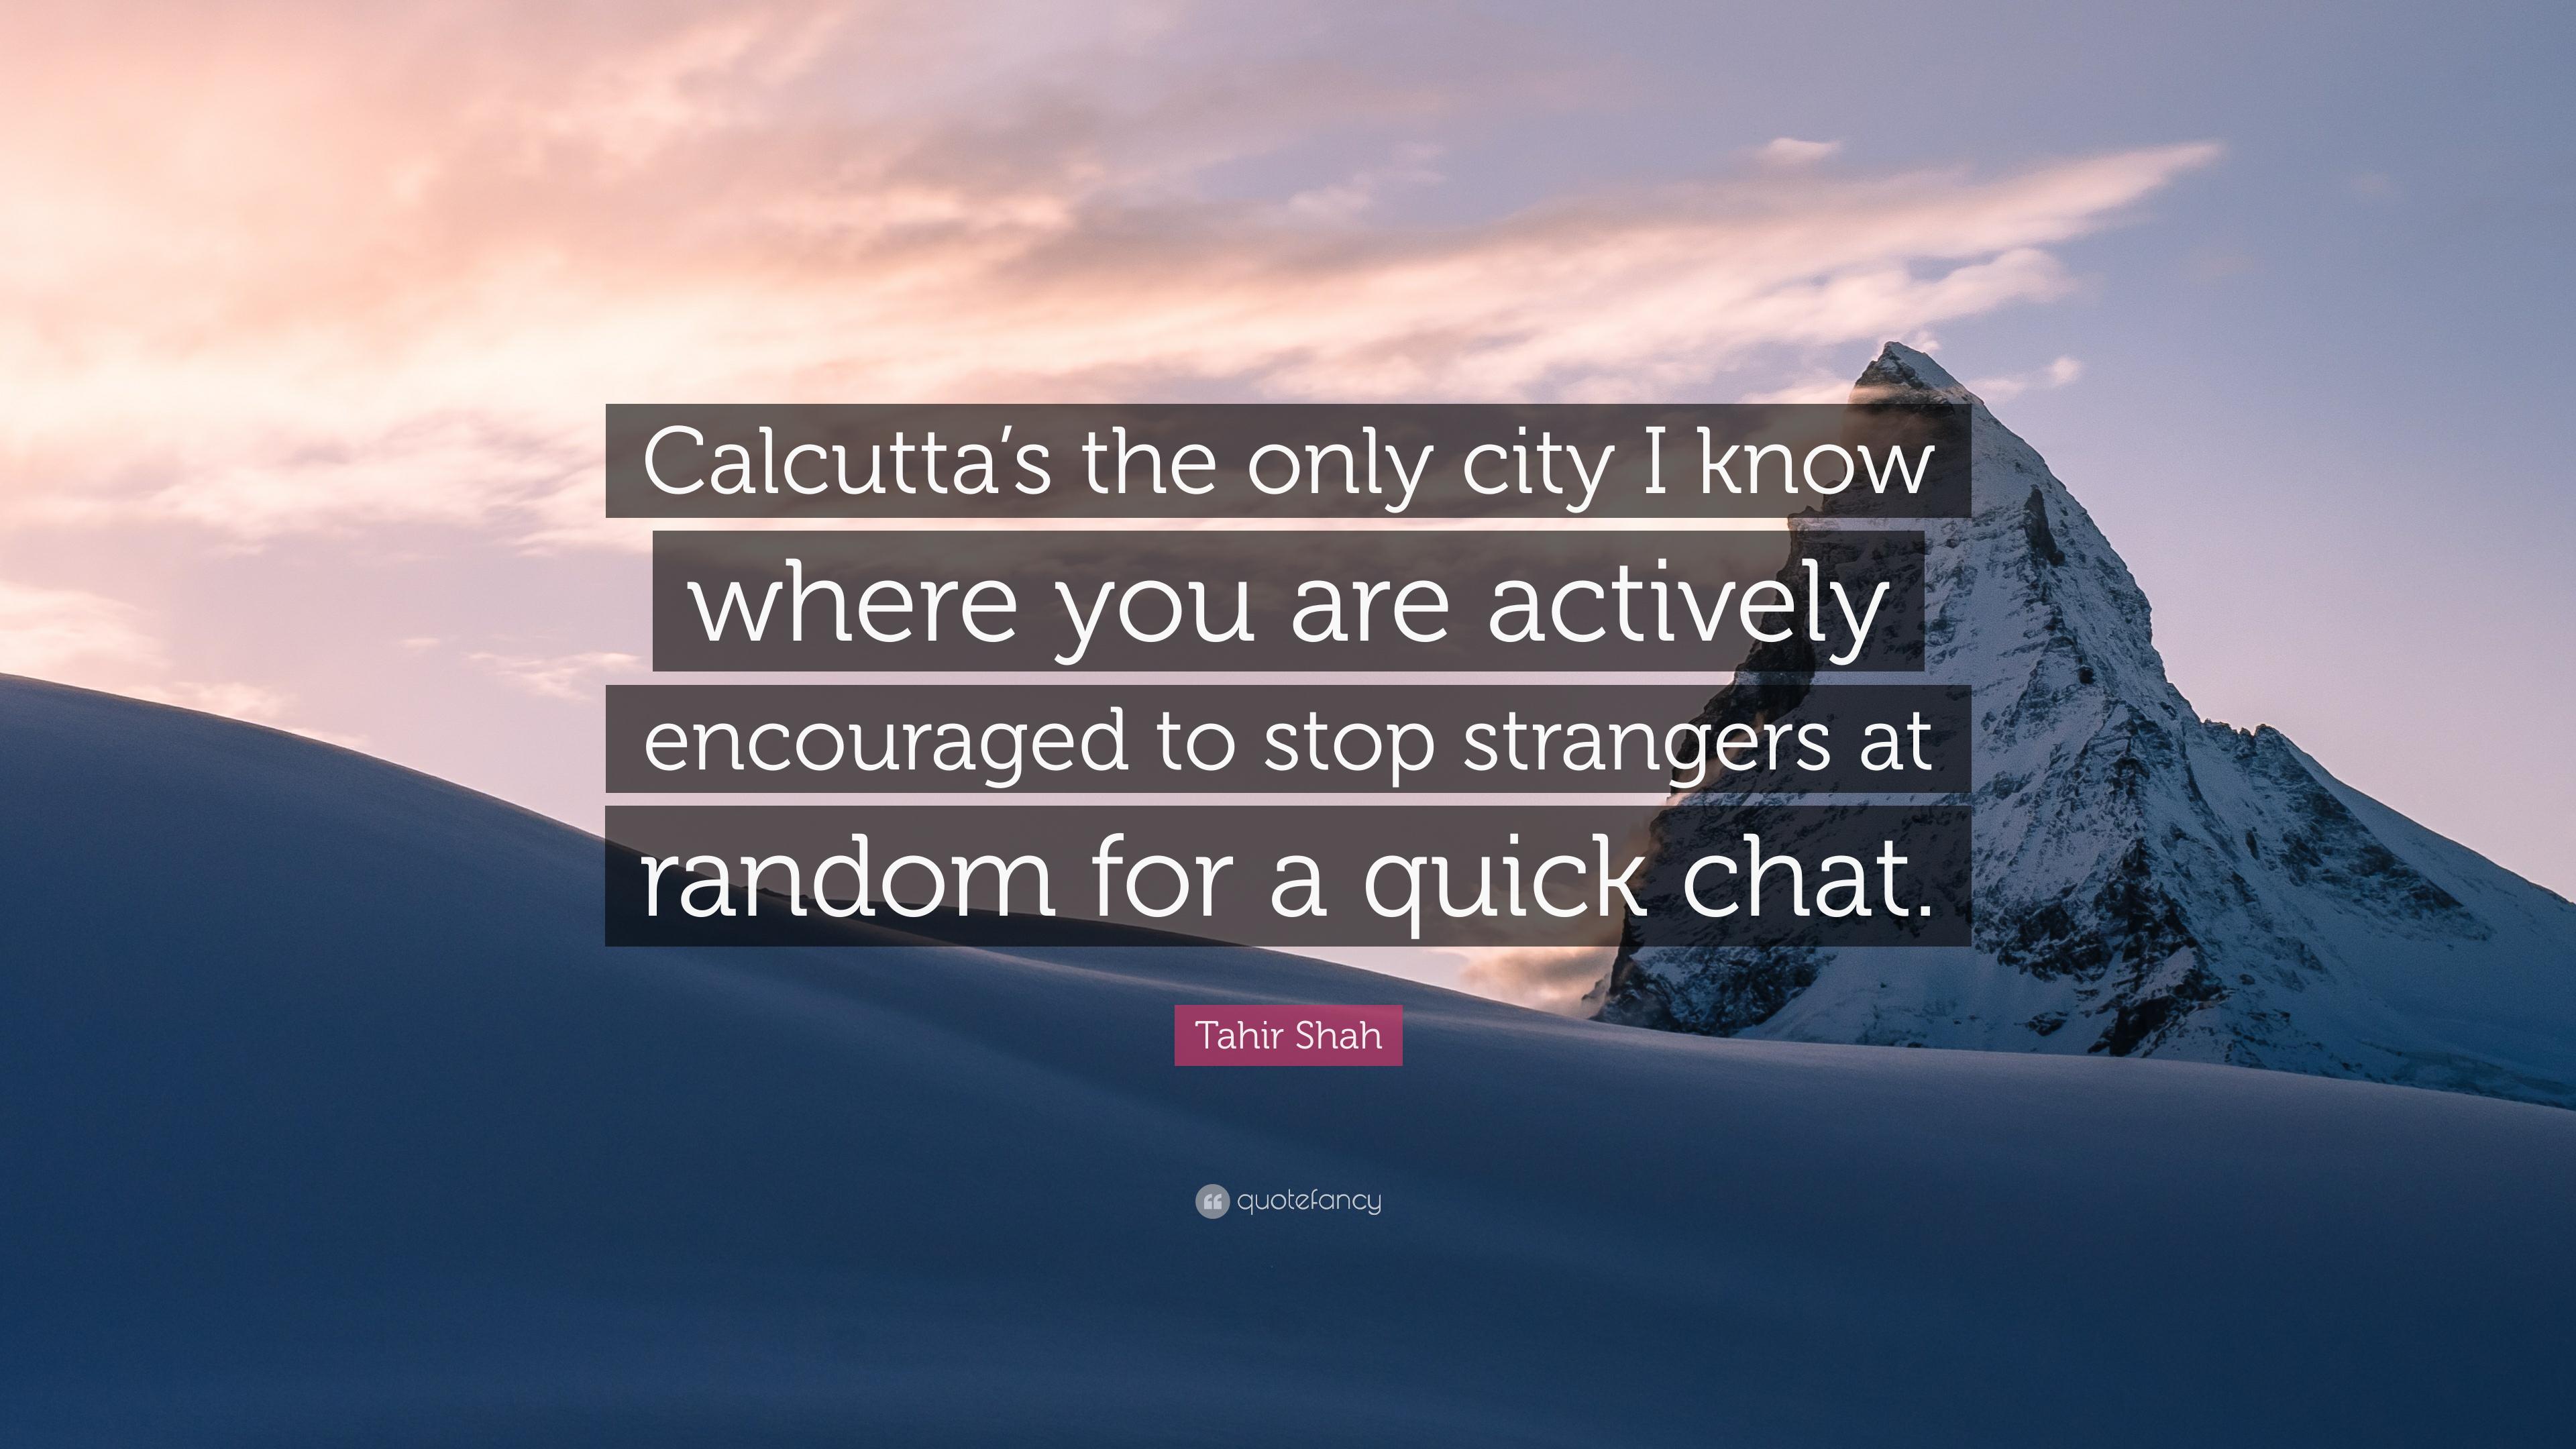 Tahir Shah Quote: “Calcutta's the only city I know where you are